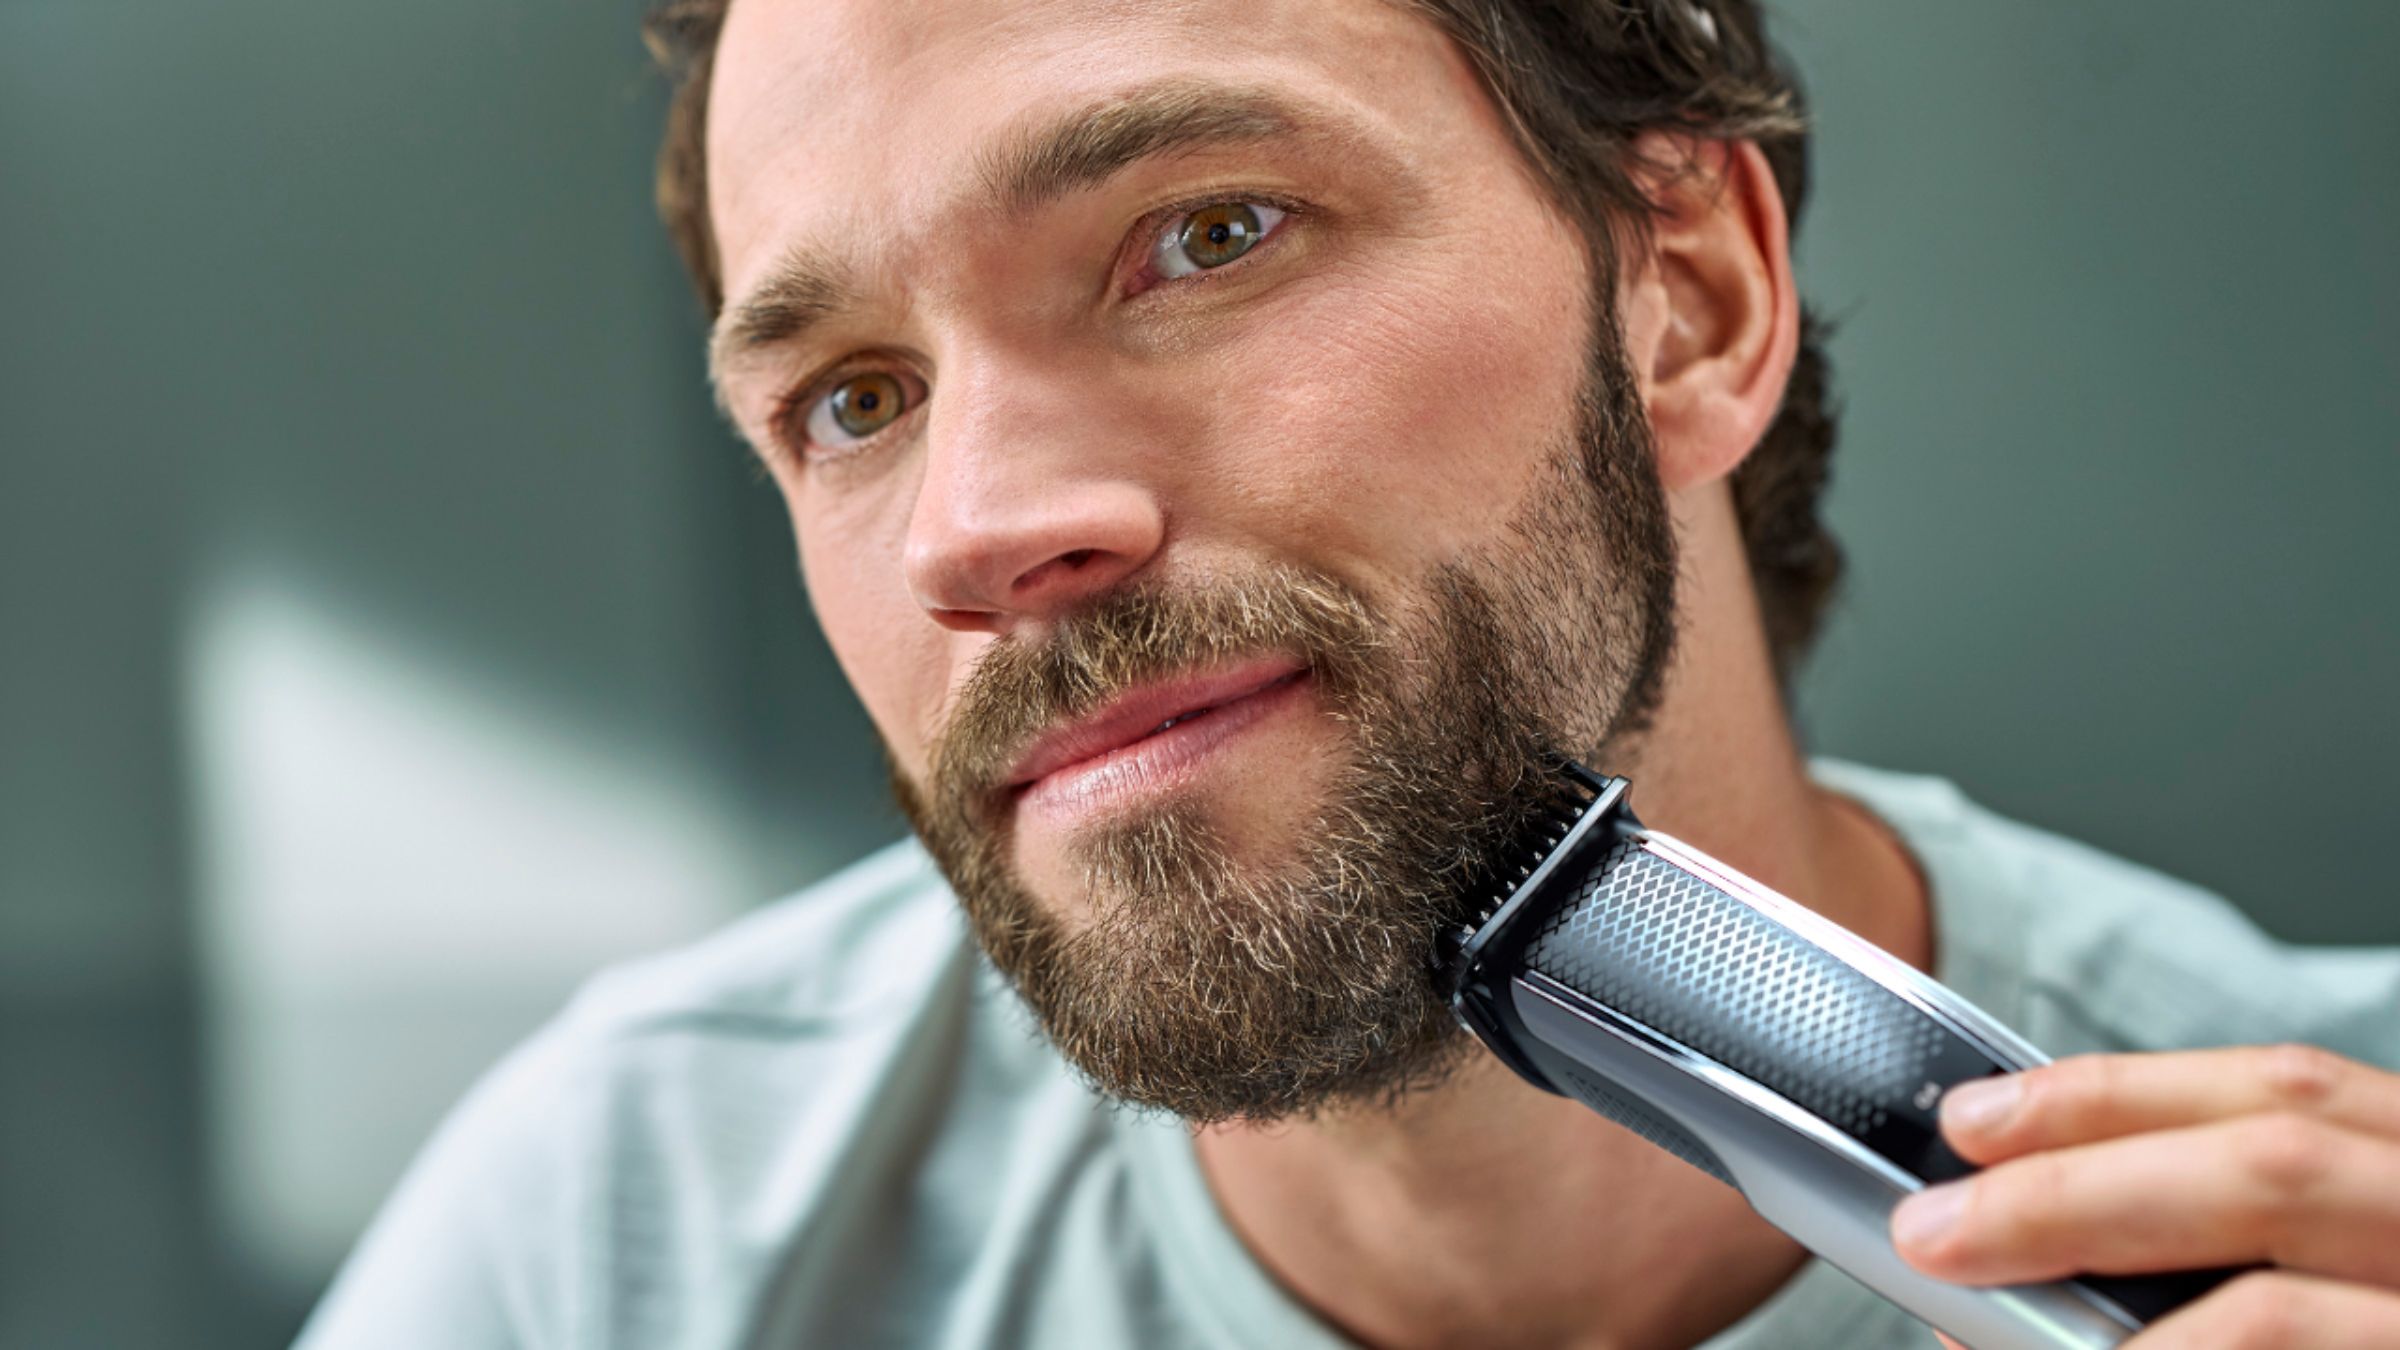 philips series 5000 washable hair clipper